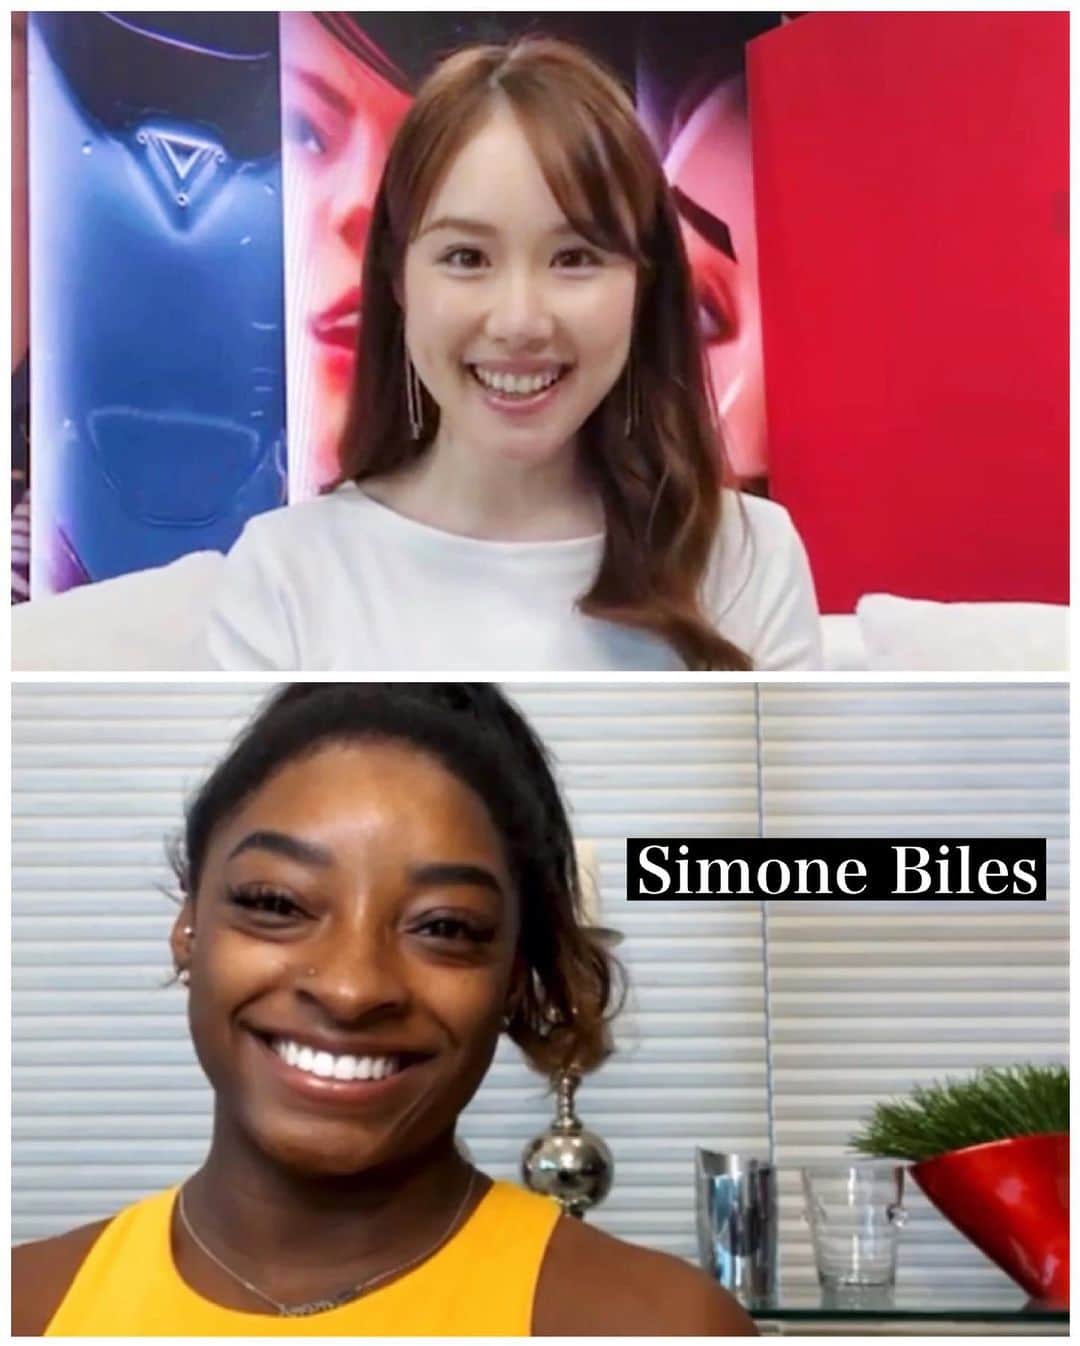 メロディー・モリタさんのインスタグラム写真 - (メロディー・モリタInstagram)「Global Launch of SK-II STUDIO's VS Series! Directed the premiere & had a 1-on-1 live interview with Simone Biles!❤️✨  We kicked off the day with an hour-long JP premiere to reveal the animated anthology series that tells the life experiences of 6 top athletes facing social pressures that are impacting women today. Naomi Watanabe and kemio were the special hosts, and their personalities shined throughout the livestream! We were in the studio from 4am, but the excitement and great teamwork produced a wonderful outcome☺️  Right after the one-hour livestream, I had the opportunity to chat live with Simone discussing everything about her first ever animated film, "VS Trolls." In addition to answering questions sent in from her fans, I asked her several of my own questions and ended up discovering her #CHANGEDESTINY moment she had at just six years old!  As a sneak peek, I shared a snippet in Slide 3, but you can watch our full live conversation uploaded @SKII's IGTV!🎥 The livestream link is also shared on my Stories, so please check it out as well as the rest of the VS Series🙌 You will be blown away!😆  本日、SK-II STUDIOの「VSシリーズ」プレミア試写会がニューヨークで行われ、1時間の生放送のディレクターと、シモーン・バイルス選手との生配信インタビューを行わせて頂きました!!✨  日本時間の夜8時から行われた「VSシリーズプレミア試写会」では、MCの渡辺直美さんとkemioさんがご出演！☺️ NY時間では朝4時入りだったにもかかわらず、お二人の息がぴったり合ったトークのおかげで、SK-IIが2年以上かけて制作した6つの映像作品の素晴らしさをお伝えすることができました✨  プレミア試写会後に行ったシモーン・バイルス選手との生配信インタビューでは、心ない言葉を投げかける「アンチ」との向き合い方＆それを乗り越えてきた方法、自身の体験談を含めながら作品で伝えているメッセージについて語って頂きました。  体操競技で史上最多のメダル獲得者のトップアスリートであるシモーンですが、実は彼女が6歳だった時に、とあるきっかけから「自分の運命を変えた瞬間」に出会ったということを今回のインタビューで知りました💡 これは正にSK-IIブランドの信念である「#CHANGEDESTINY」と深くリンクする、とても素敵なストーリーでした。  投稿では1分のプレビュー動画をシェアしていますが、生配信インタビューのフルバージョンはSK-IIアカウントにアップされていますので、是非チェックしてみてください！🎥 そしてSK-II「VSシリーズ」全作品は、YouTubeでフルバージョンを観ることができますので、それぞれの選手達の素晴らしいメッセージを是非ご覧ください😊🎀 #SKII #VSSeries #SKIIPartner #MelodeeMoritainterviews」5月2日 9時46分 - melodeemorita